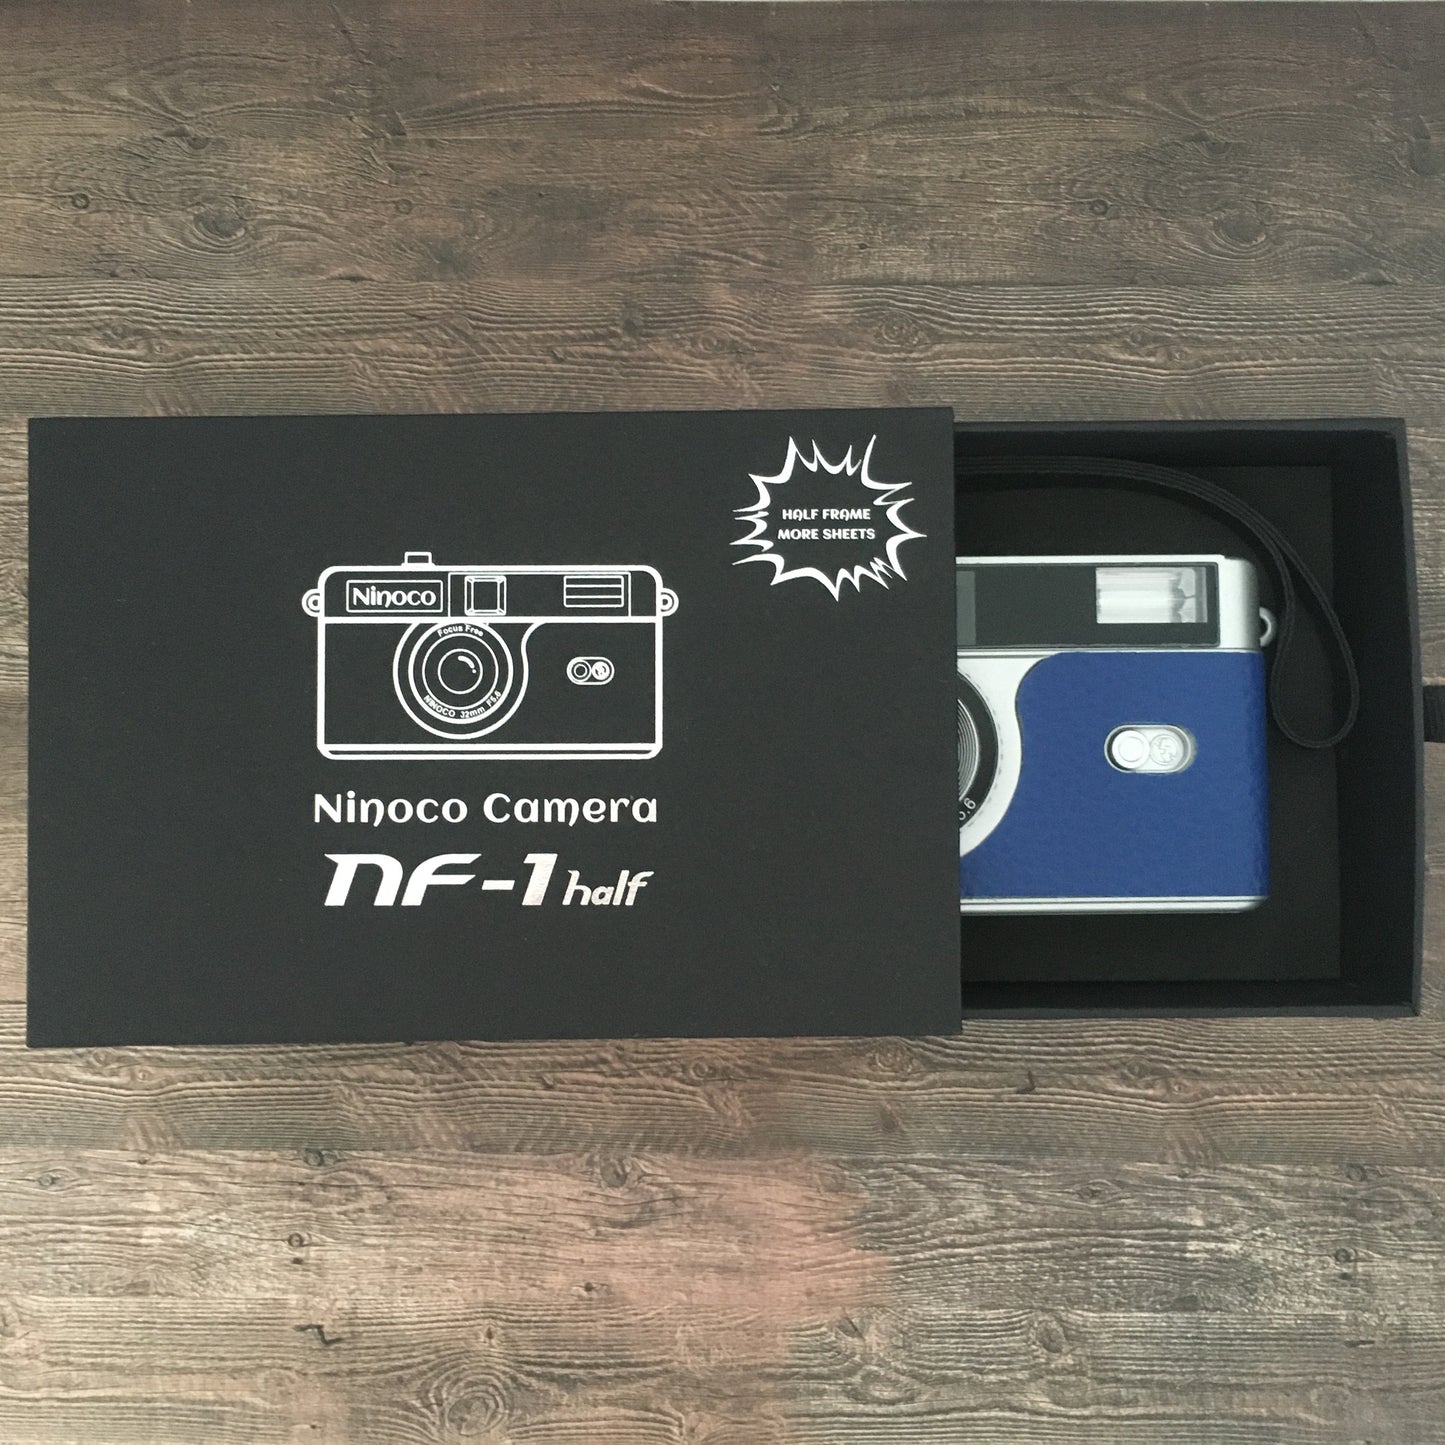 Point & shoot ! Brand new 35mm film camera with marine blue leather